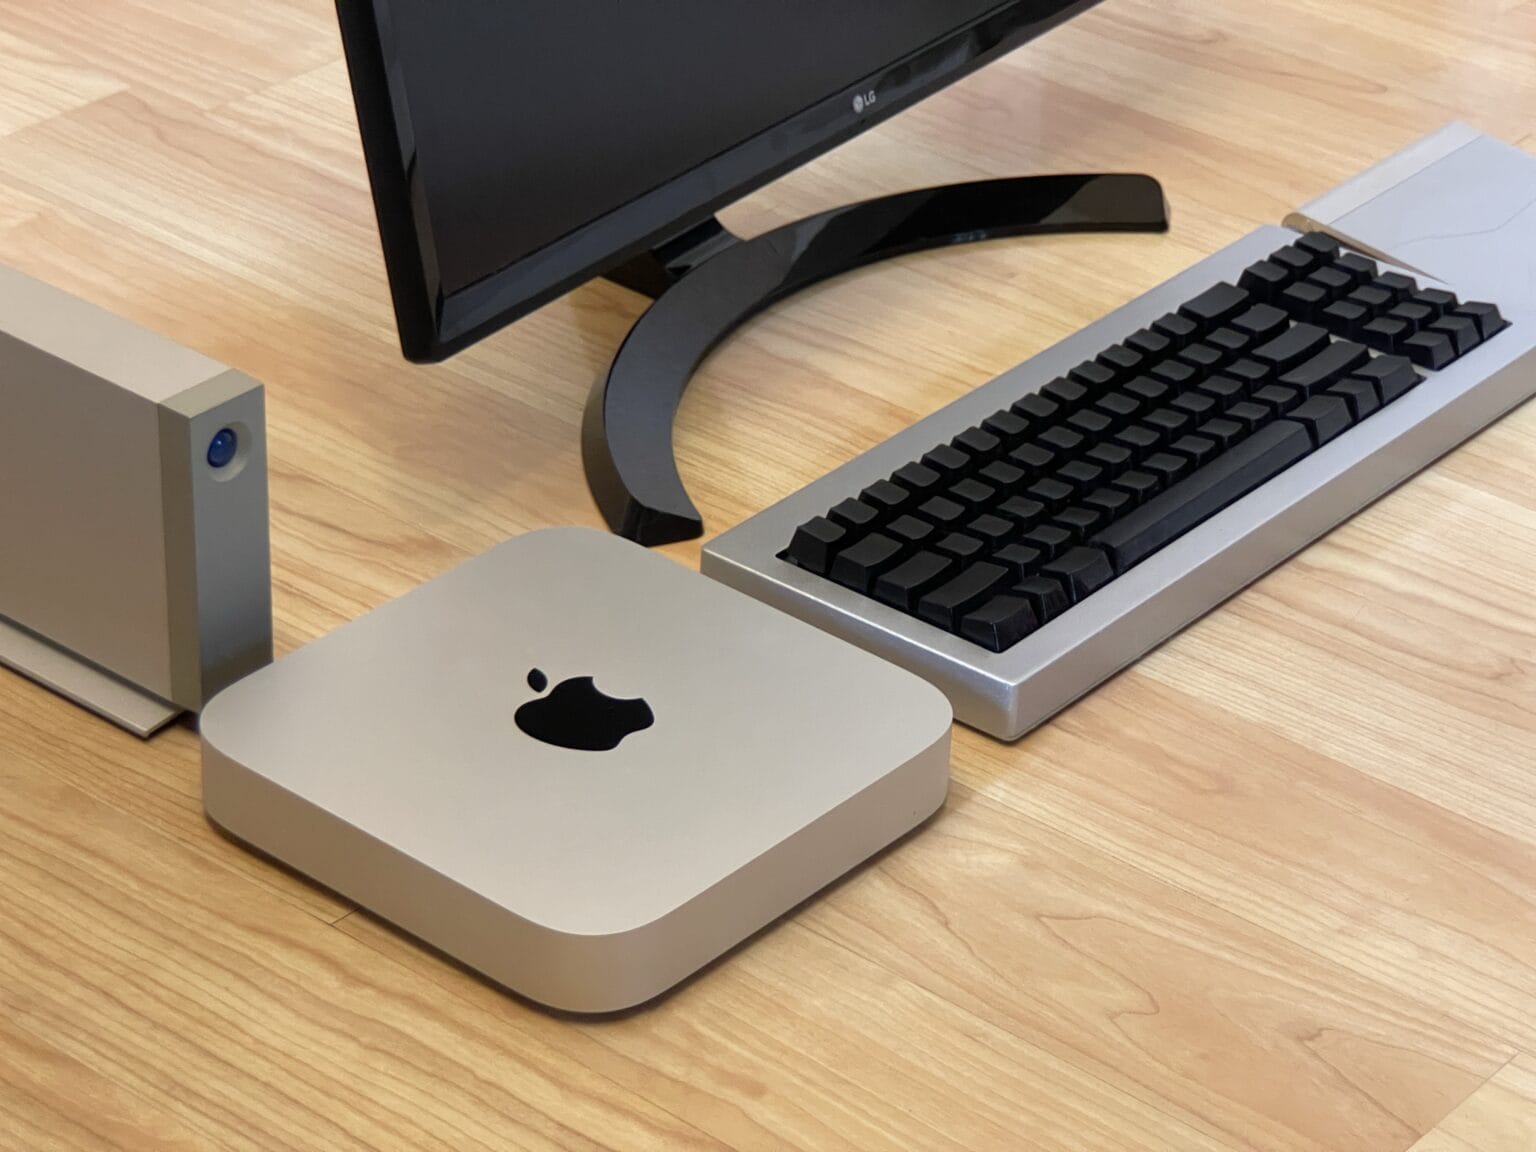 Mac mini with external hard drive, keyboard, trackpad and display sitting on the floor (isometric perspective)